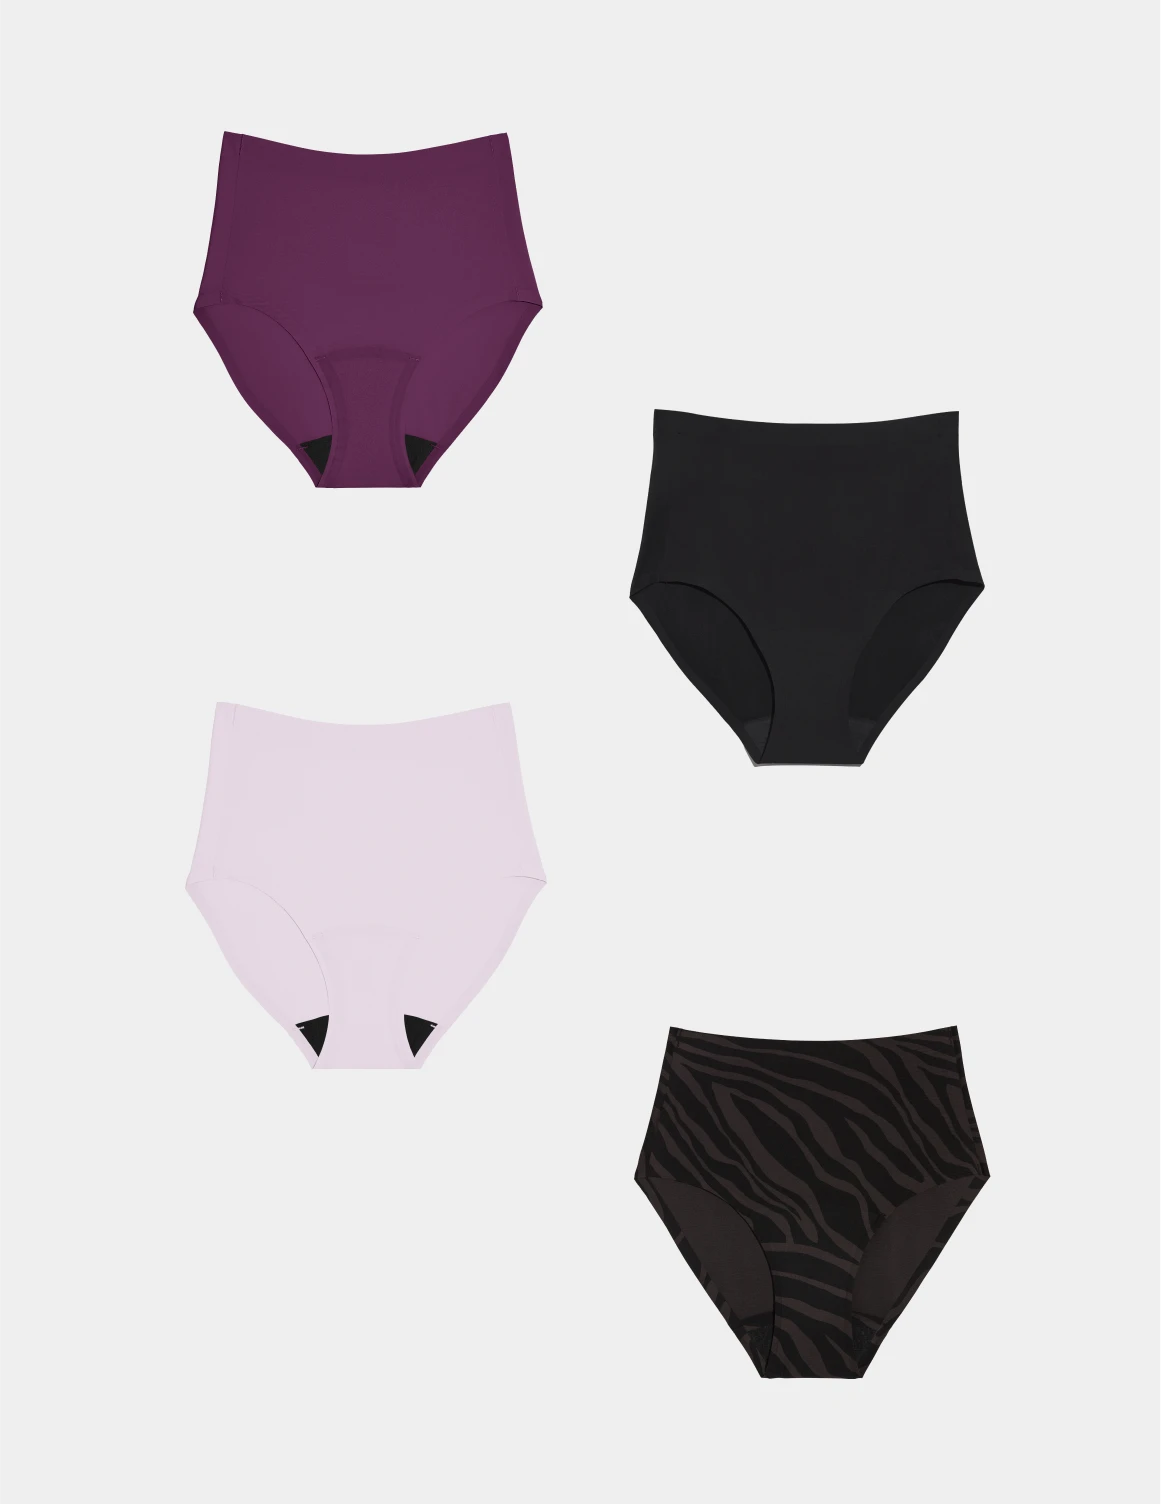 Avon - Product Detail : Sola 5-in-1 Maxi Panty Pack